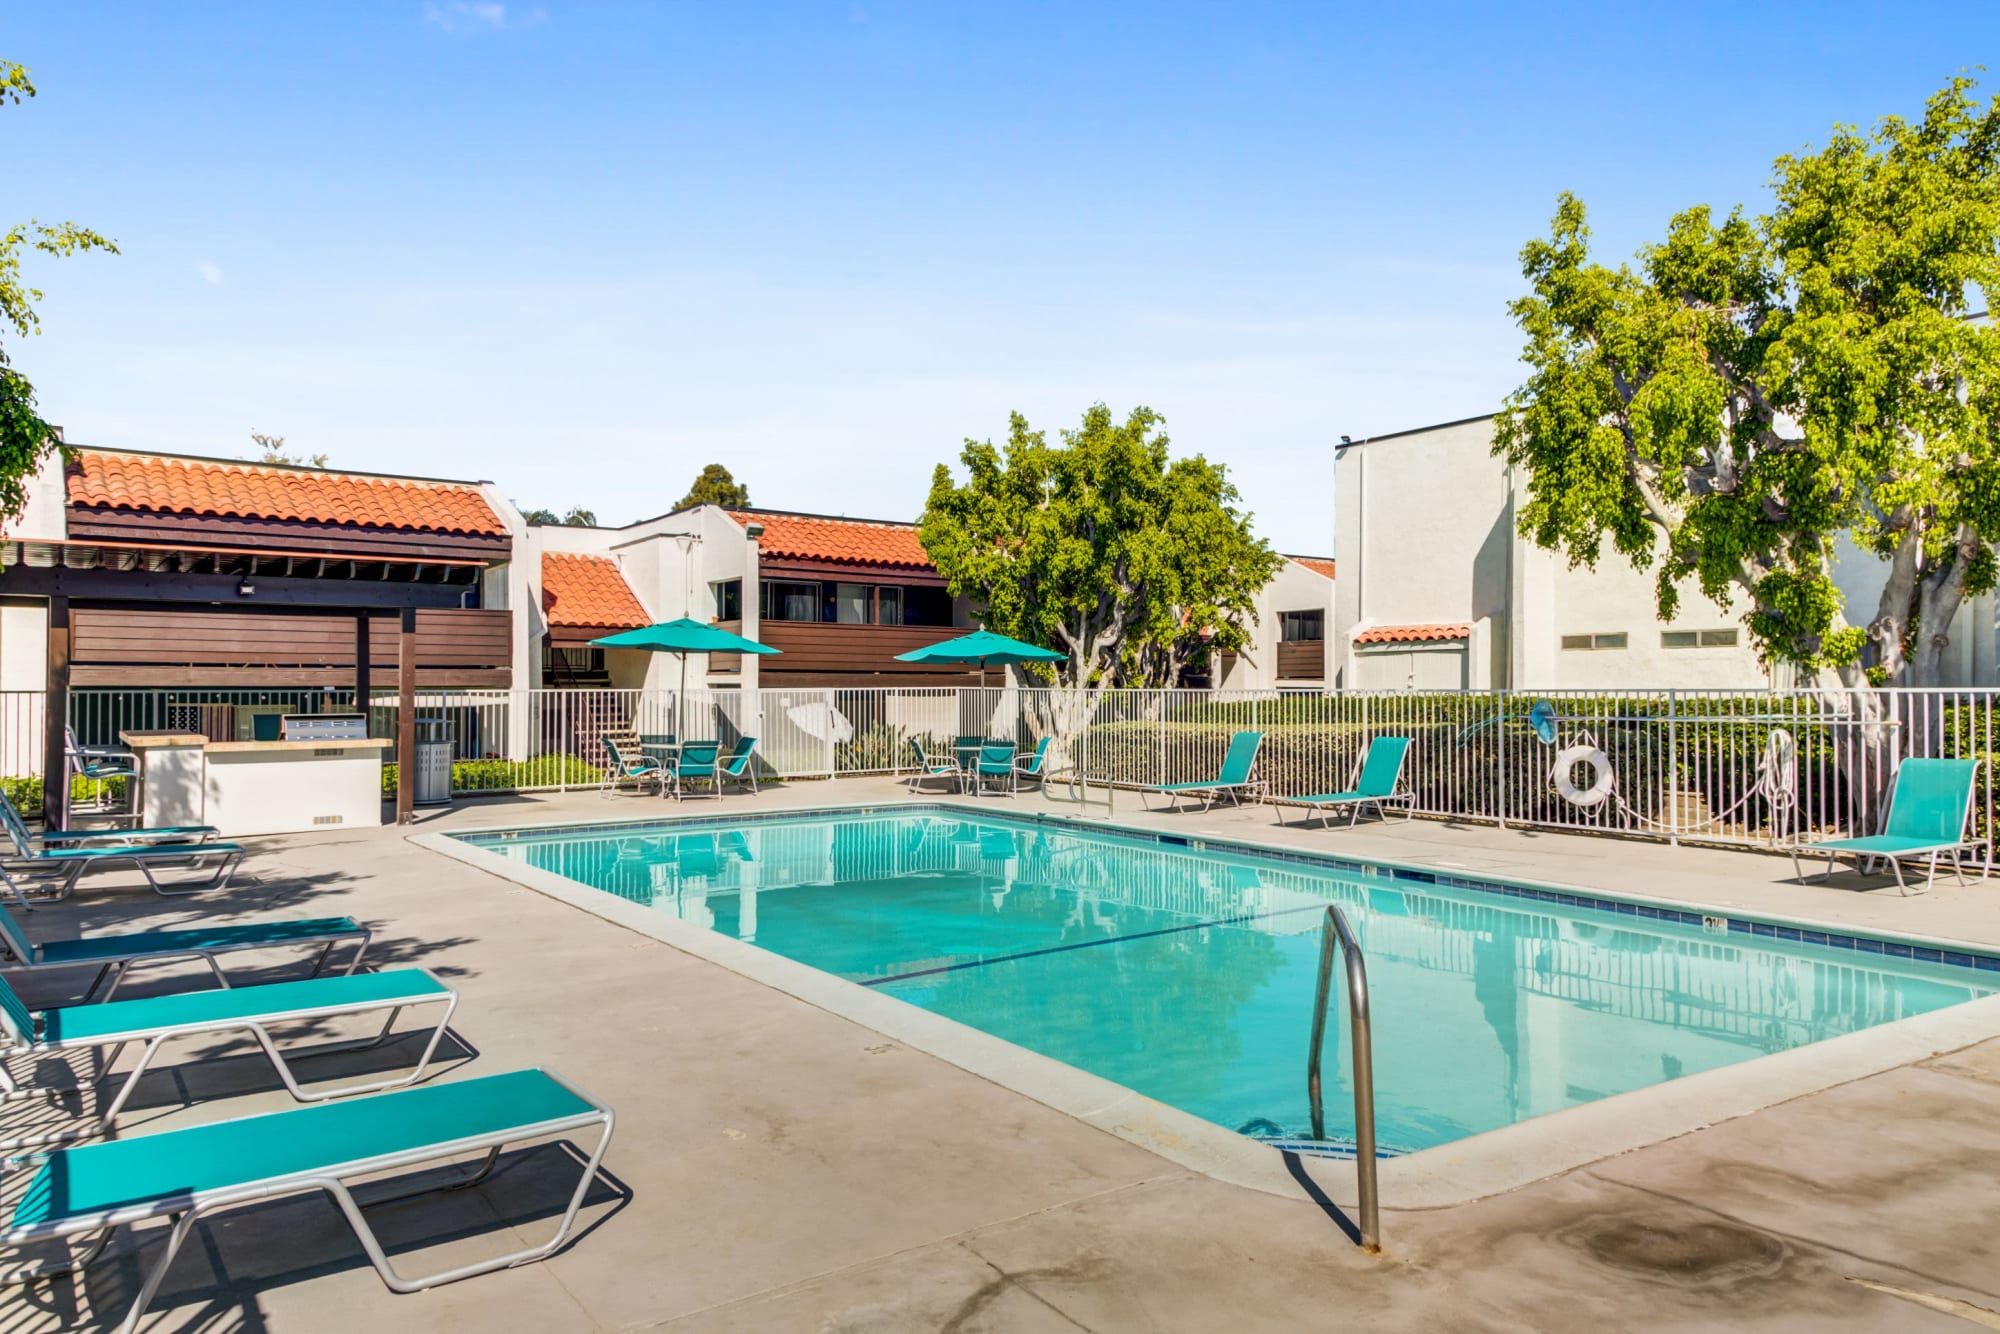 The pool, spa, cabana and barbecue area at Kendallwood Apartments in Whittier, California